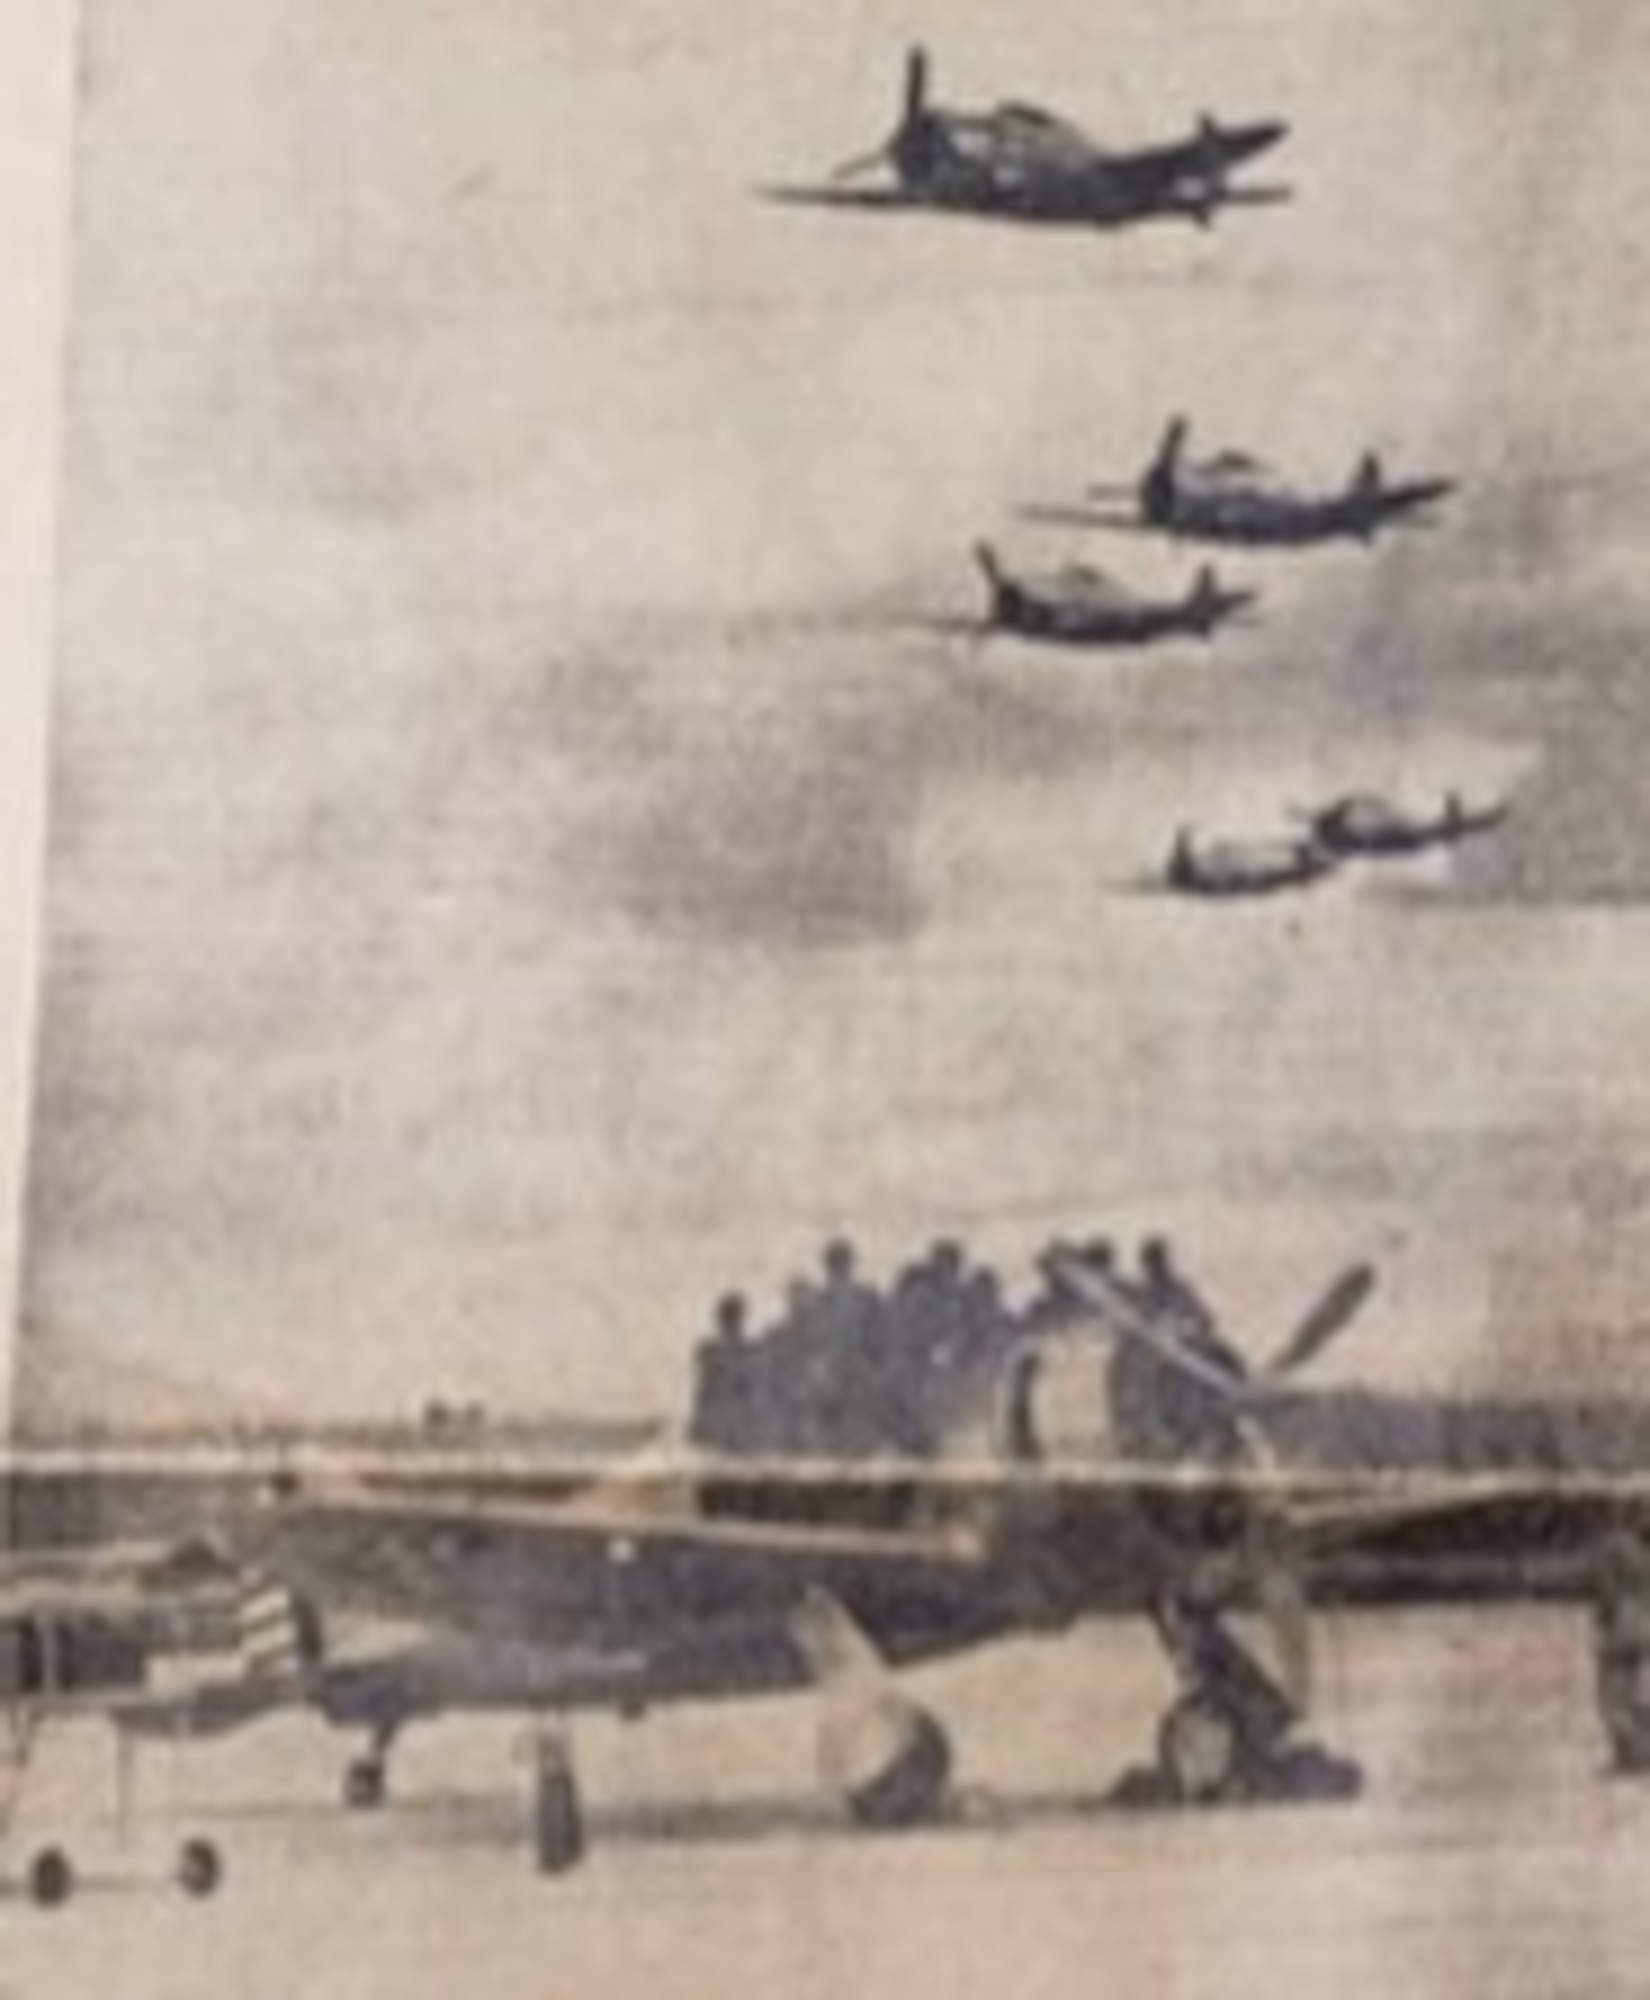 A flight of Republic P-43 Lancer fighters of the 55th Pursuit Group beats up the ramp in a pass in review overhead Portland Air Base, Oregon on Saturday, September 6, 1941. The base commander, Col Joseph Stromme, hosted some 80 prospective new aviation cadets on that day, about eight of which are looking up from their single-winged reviewing stand. (Photo courtesy of the Oregonian, 142nd Wing History Archive)